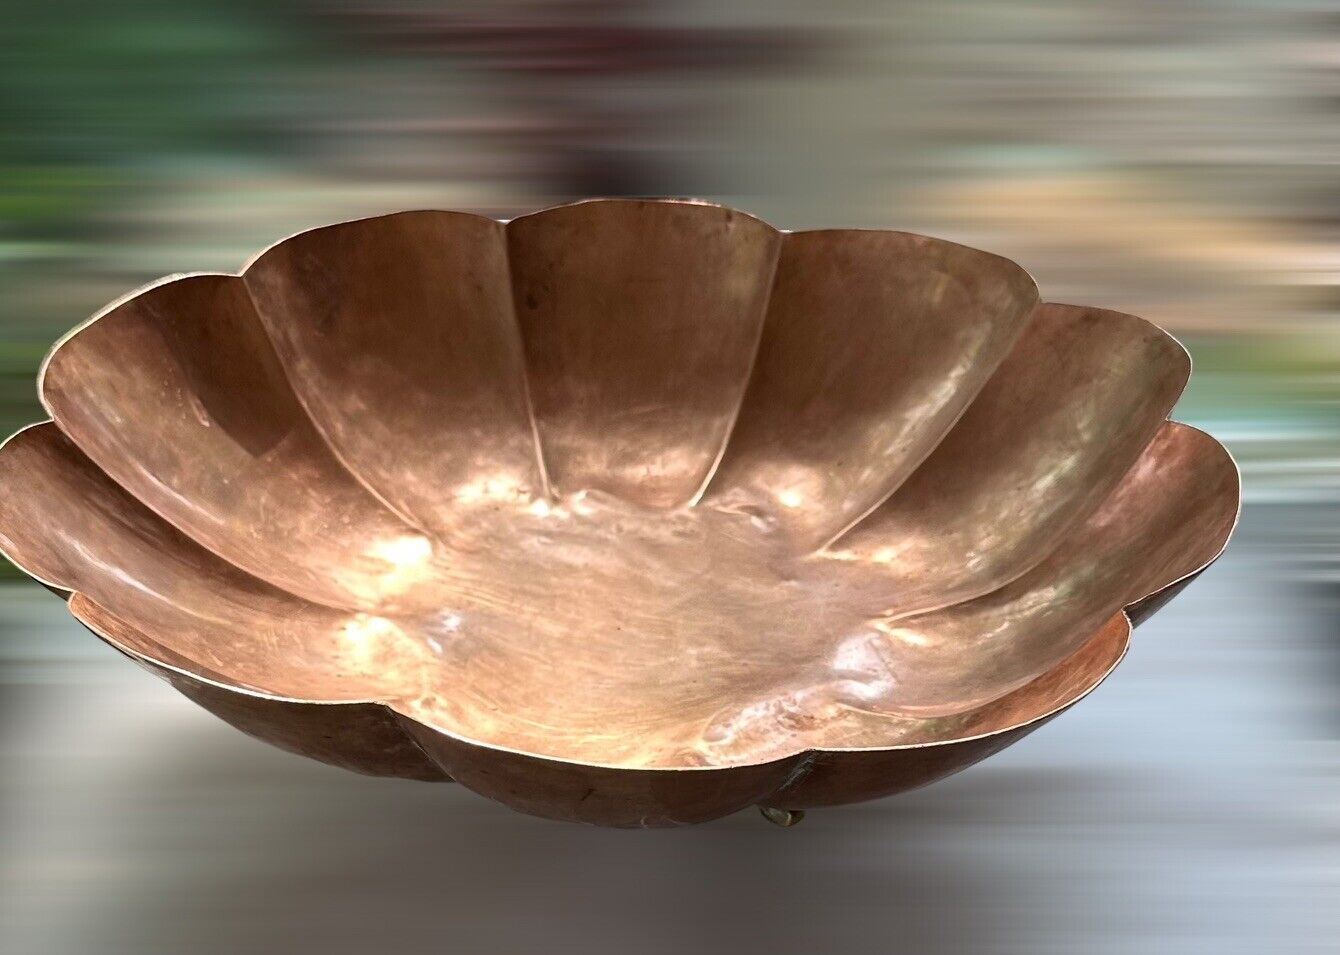 Vintage HAND HAMMERED COPPER BOWL Large 14.25”Diameter, Scalloped, Footed OLD